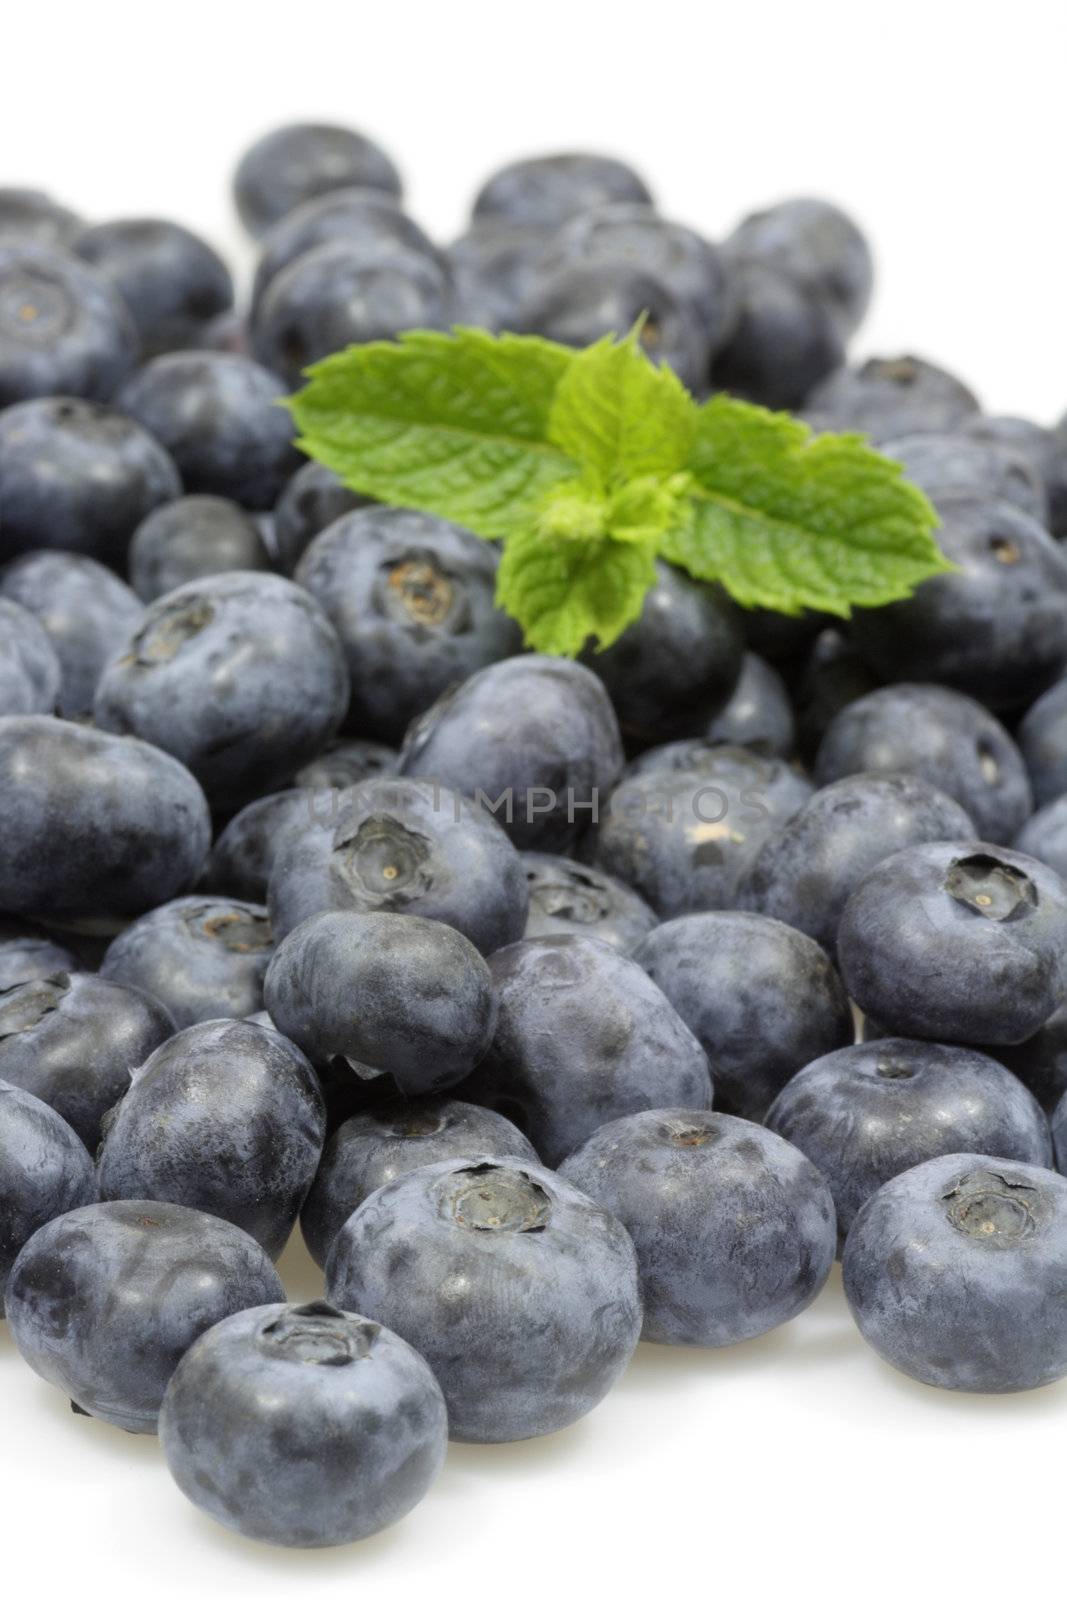 Fresh blueberries with mint leaves over white background